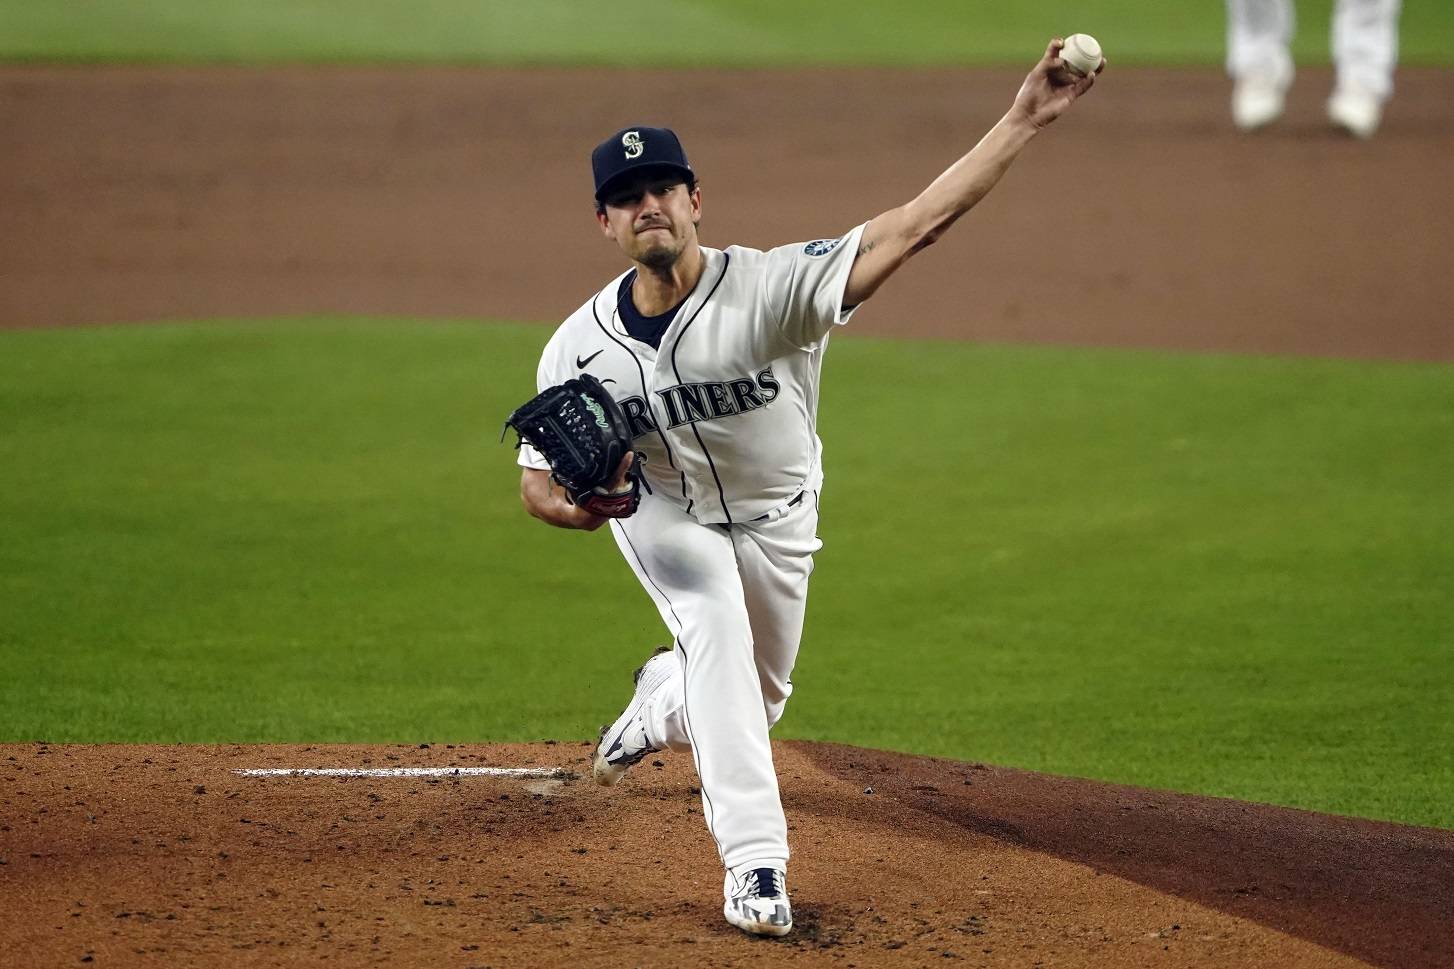 MARINERS: Seattle smokes the A’s in hazy conditions